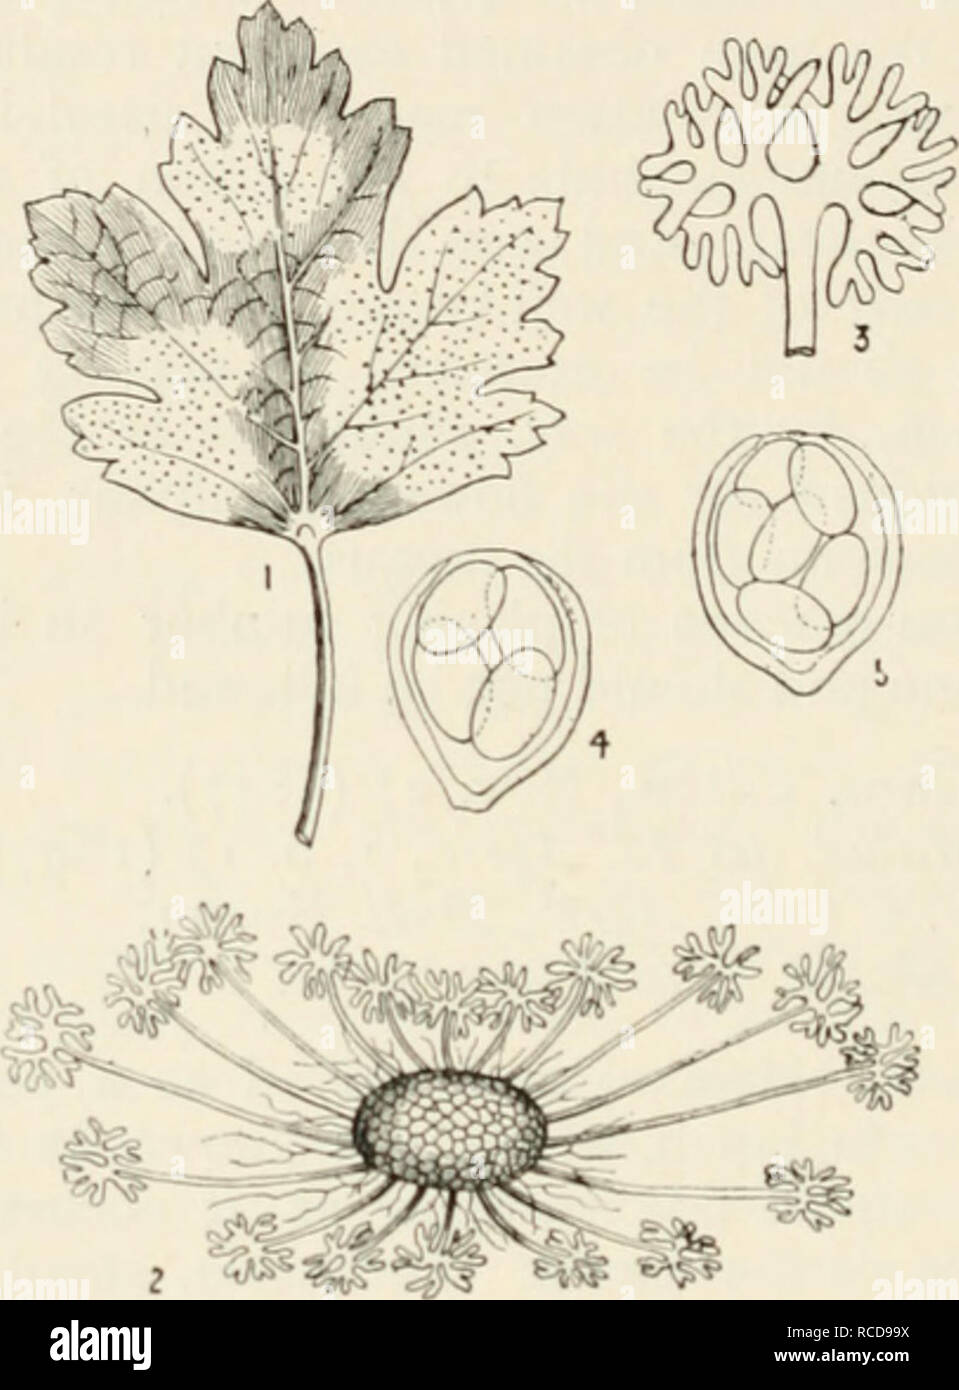 . Diseases of cultivated plants and trees. Plant diseases; Plants -- Wounds and injuries; Plants, Protection of; Trees -- Diseases and pests. 158 DISEASES OF CULTIVATED PLANTS is somewhat erratic in its appearance, and during certain seasons it covers both surfaces of the leaves of gooseberries with a delicate greyish-white mildew. Less frequently the fruit is also attacked. When the mycelium is well established on the leaf, it becomes covered with a mass of conidia, giving to it a mealy appearance. The ascigerous condition is usually produced in abundance later in the. KiG. ^o.—Microsphaera ^ Stock Photo